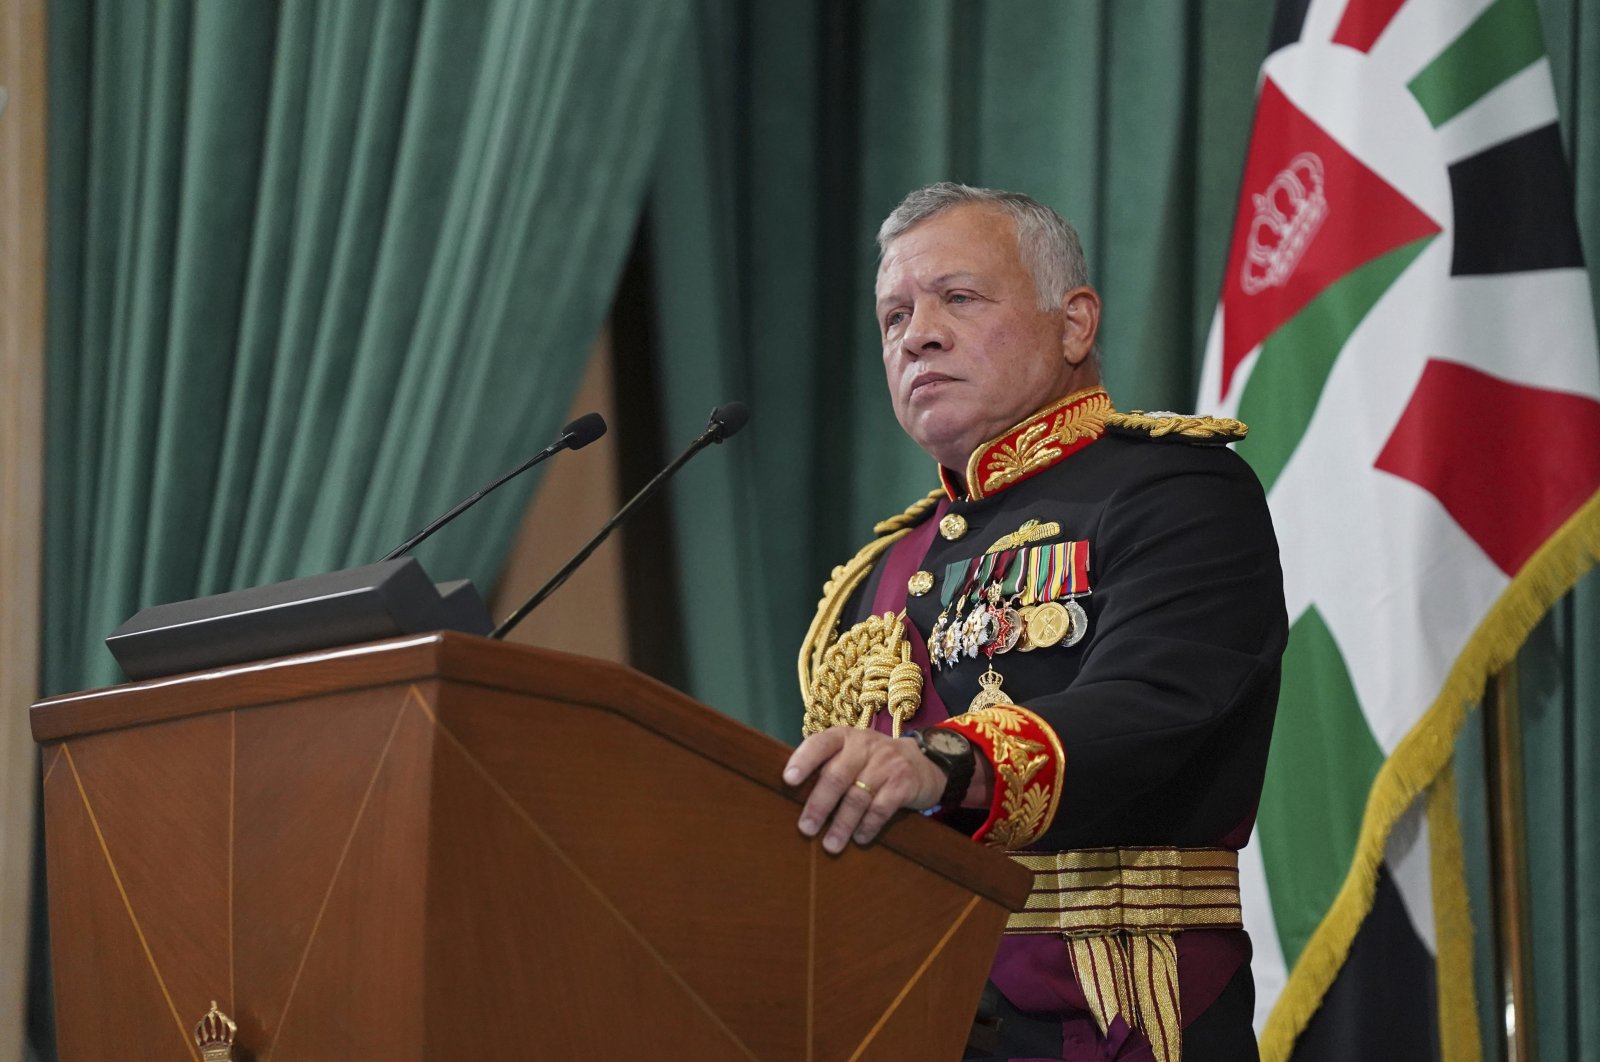 In this photo released by the Royal Hashemite Court, Jordan's King Abdullah II gives a speech during the inauguration of the 19th Parliament’s non-ordinary session, Amman, Jordan, Thursday, Dec. 10, 2020. (Yousef Allan/The Royal Hashemite Court via AP)